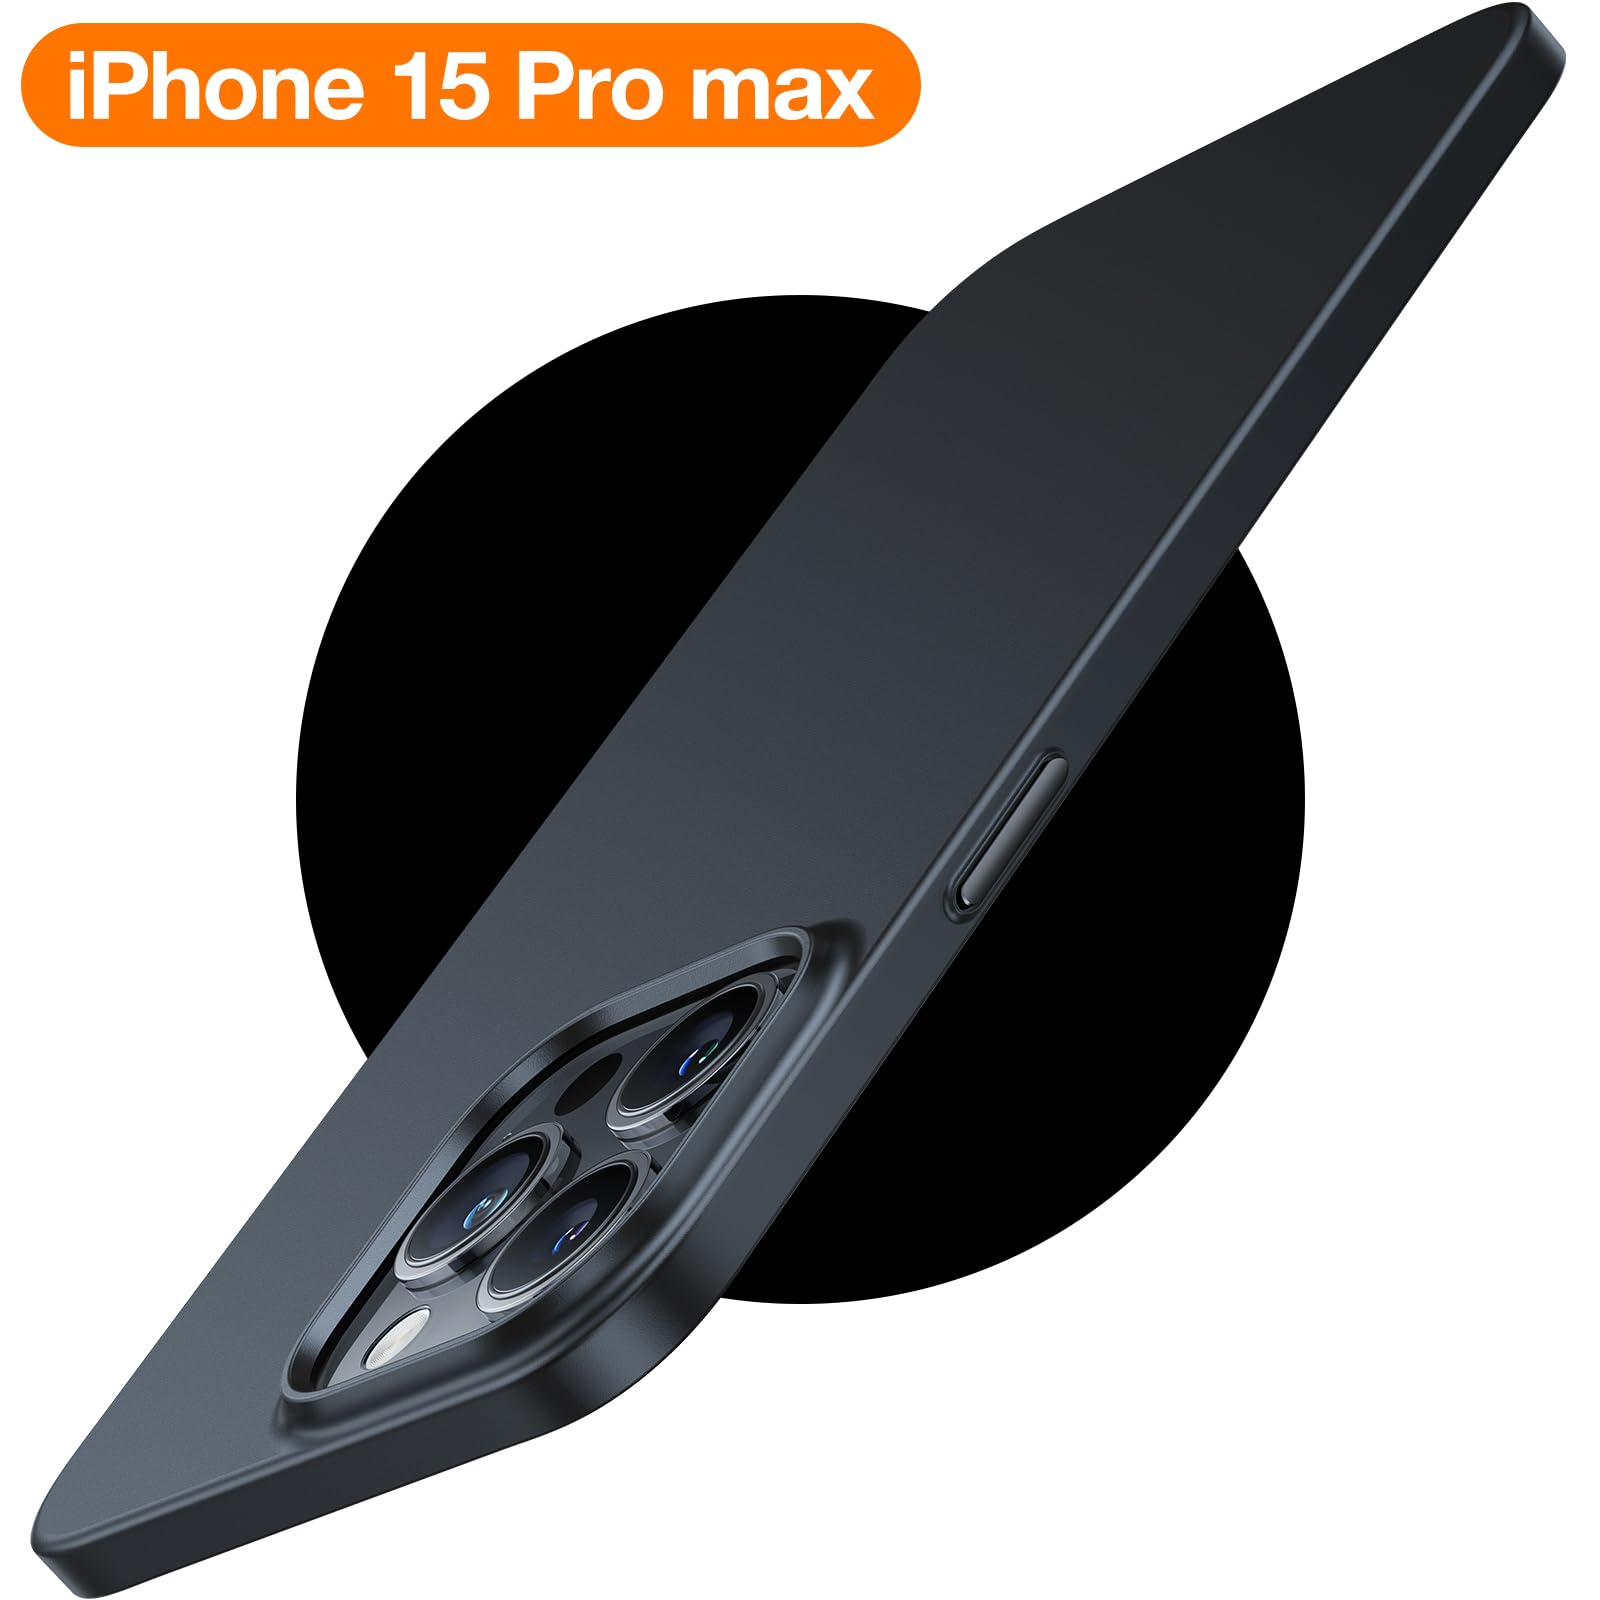 TORRAS Magnetic Slim-Fit Designed for iPhone 15 Pro Max Case, Ultra-Thin 15 ProMax Phone Case Compatible with MagSafe, Lightweight Anti-Scratch Matte Hard Cover 15 Pro Max 6.7 inch OriginFit, Black